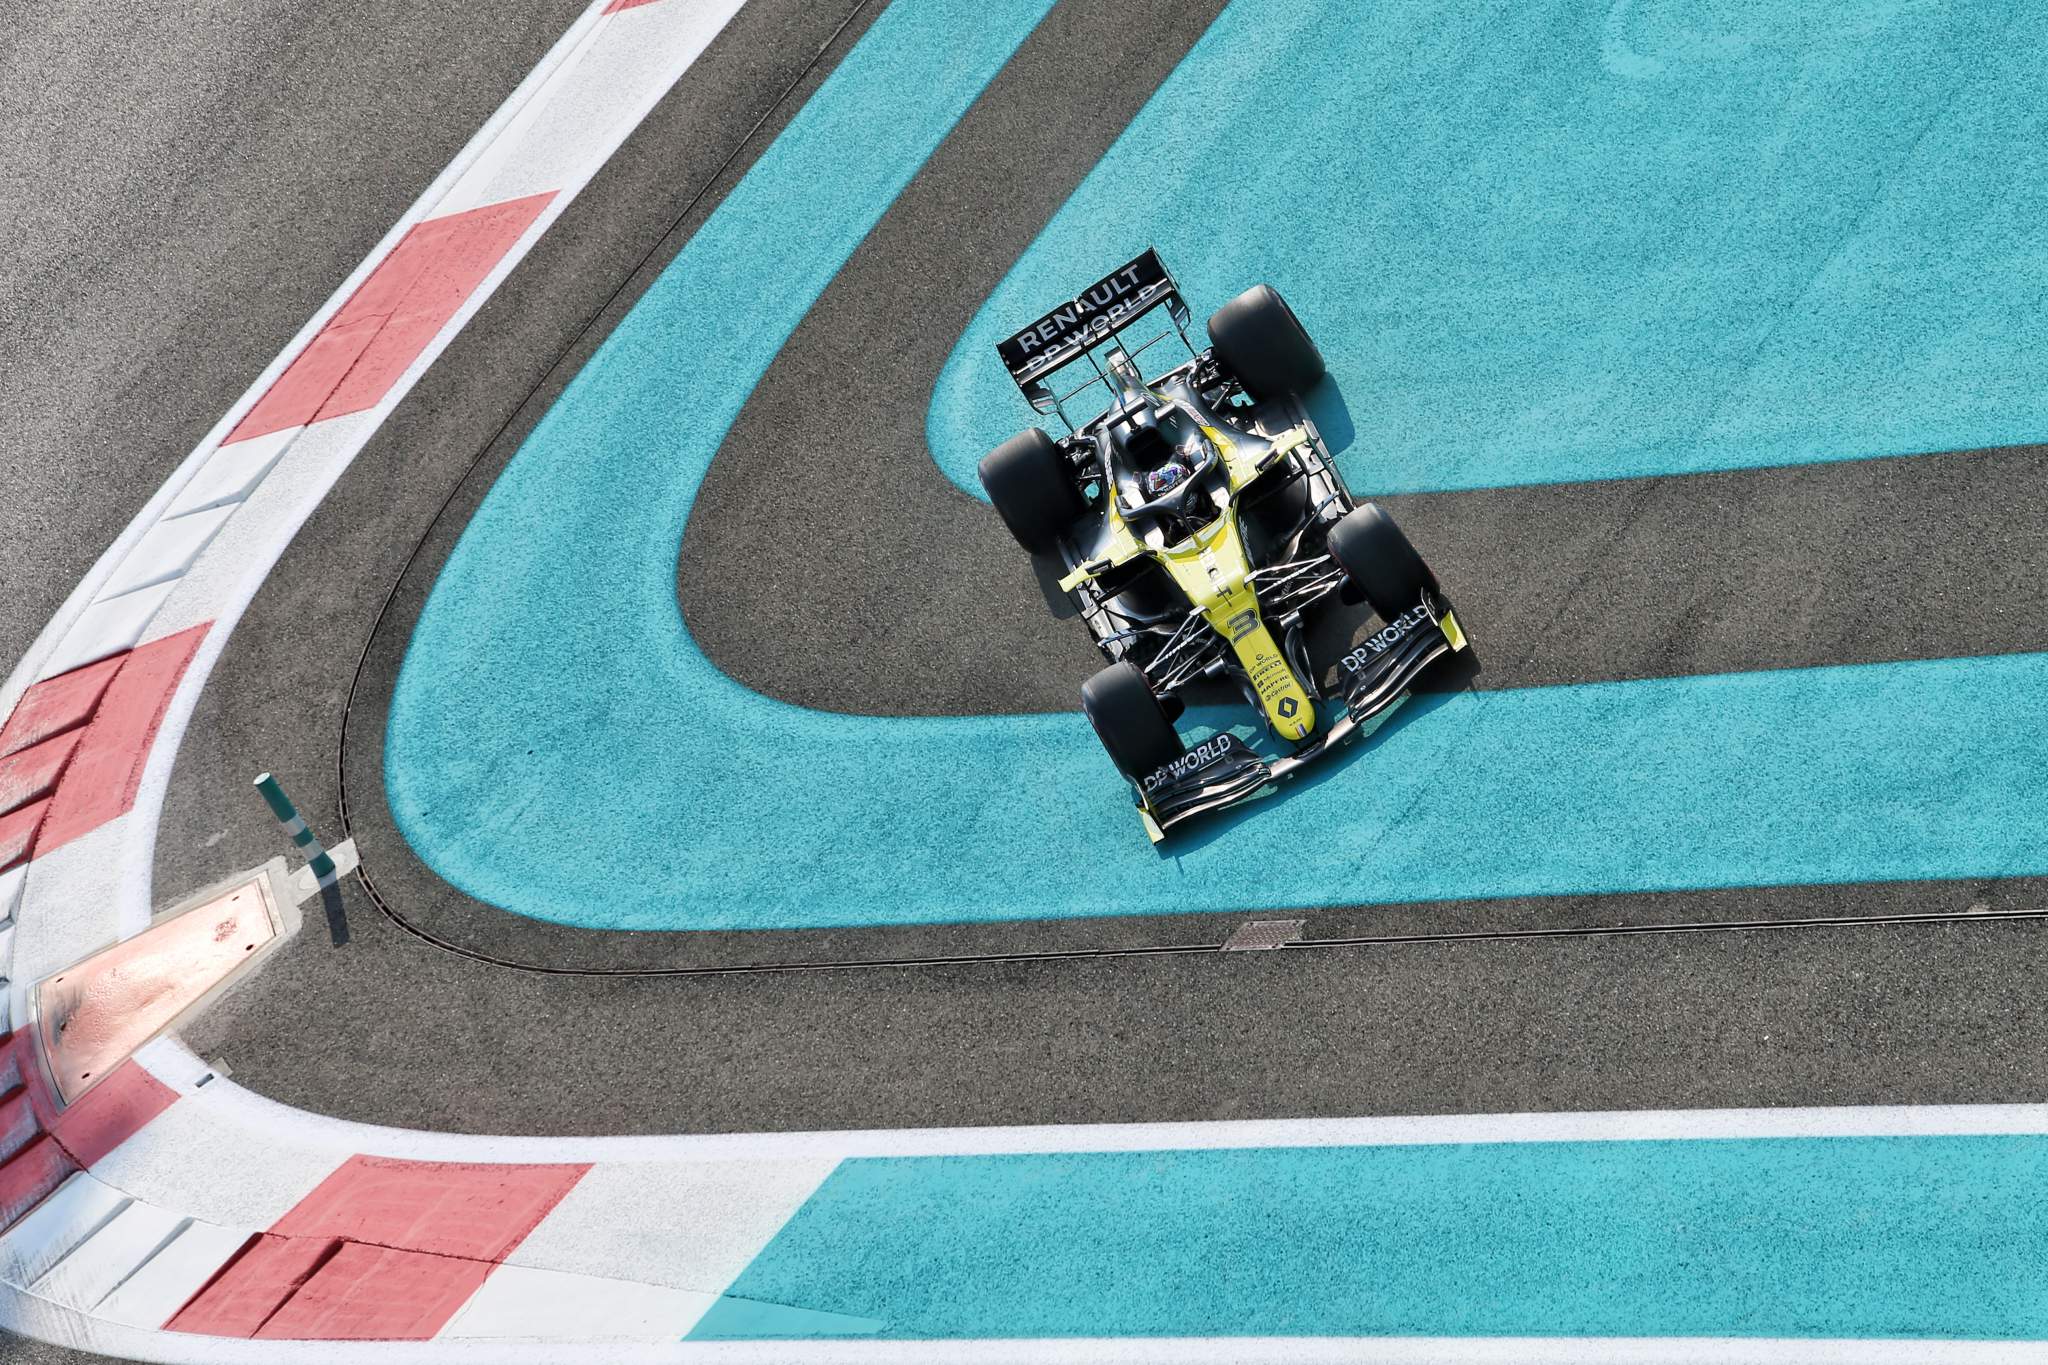 Six Reasons Abu Dhabi F1 Races Consistently Disappoint The Race